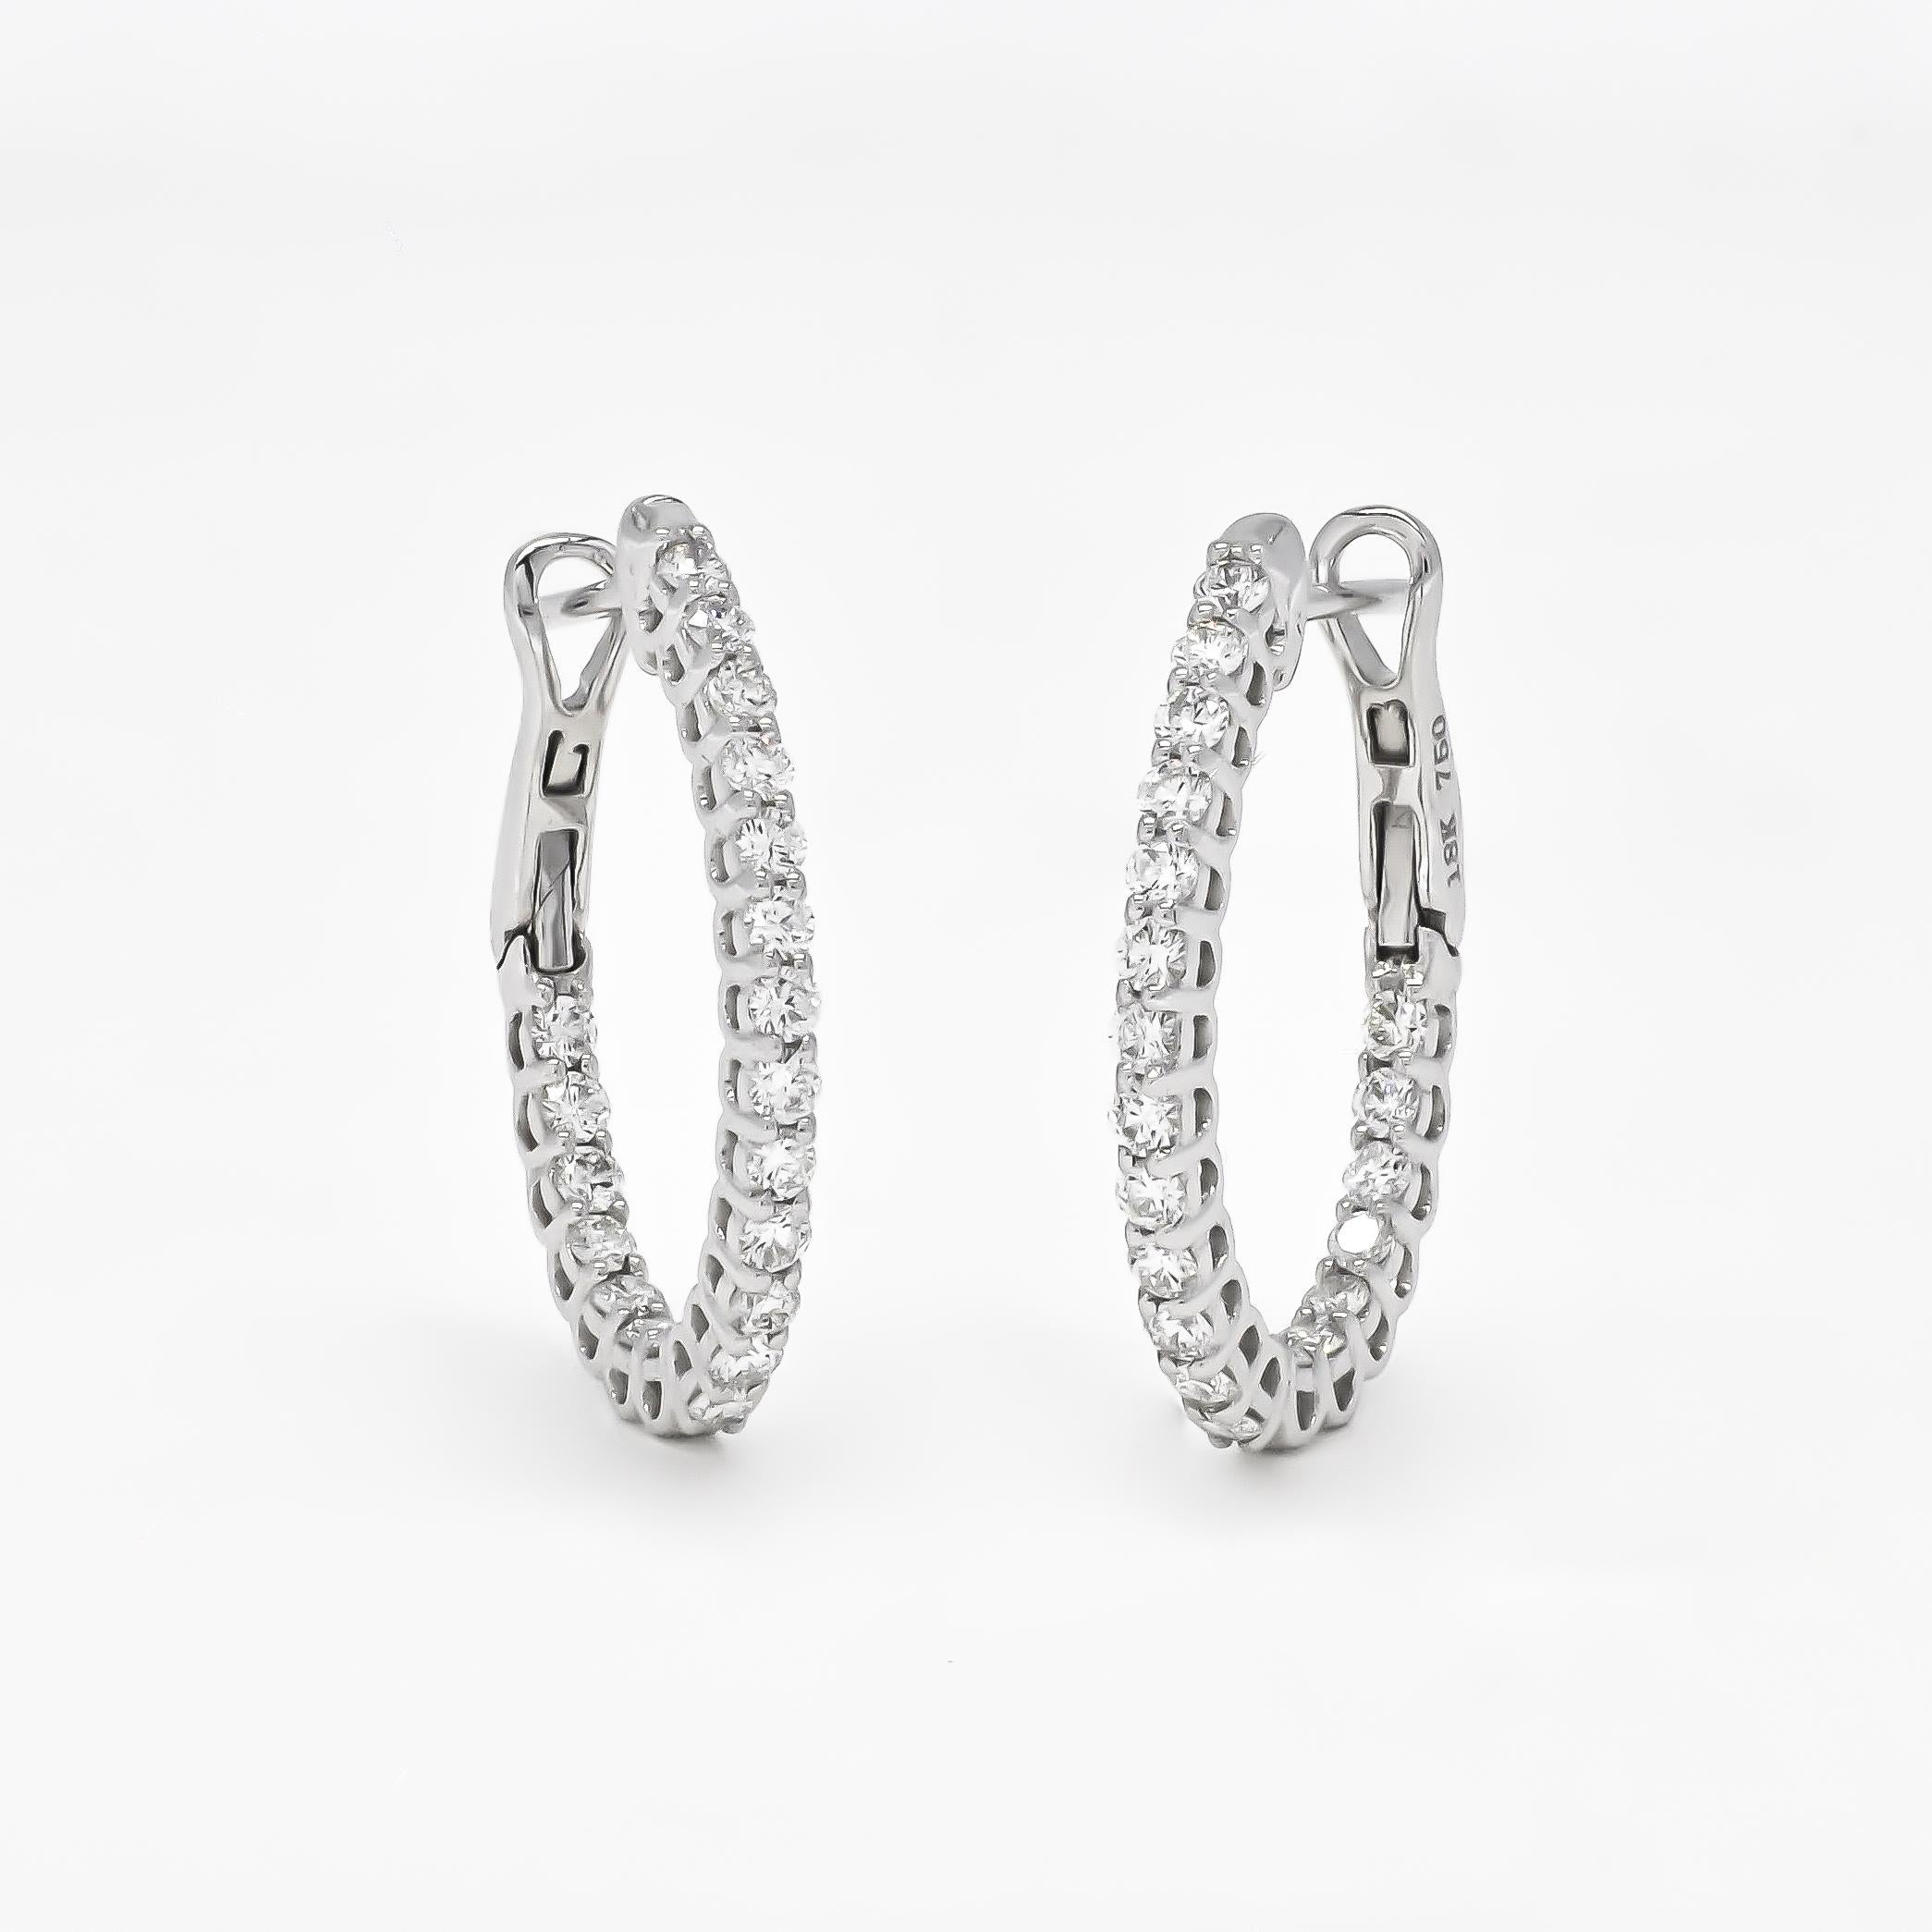 Modern Natural Diamond 1.02 Carats 18KT White Gold 'In and out' Hoop Earrings For Sale